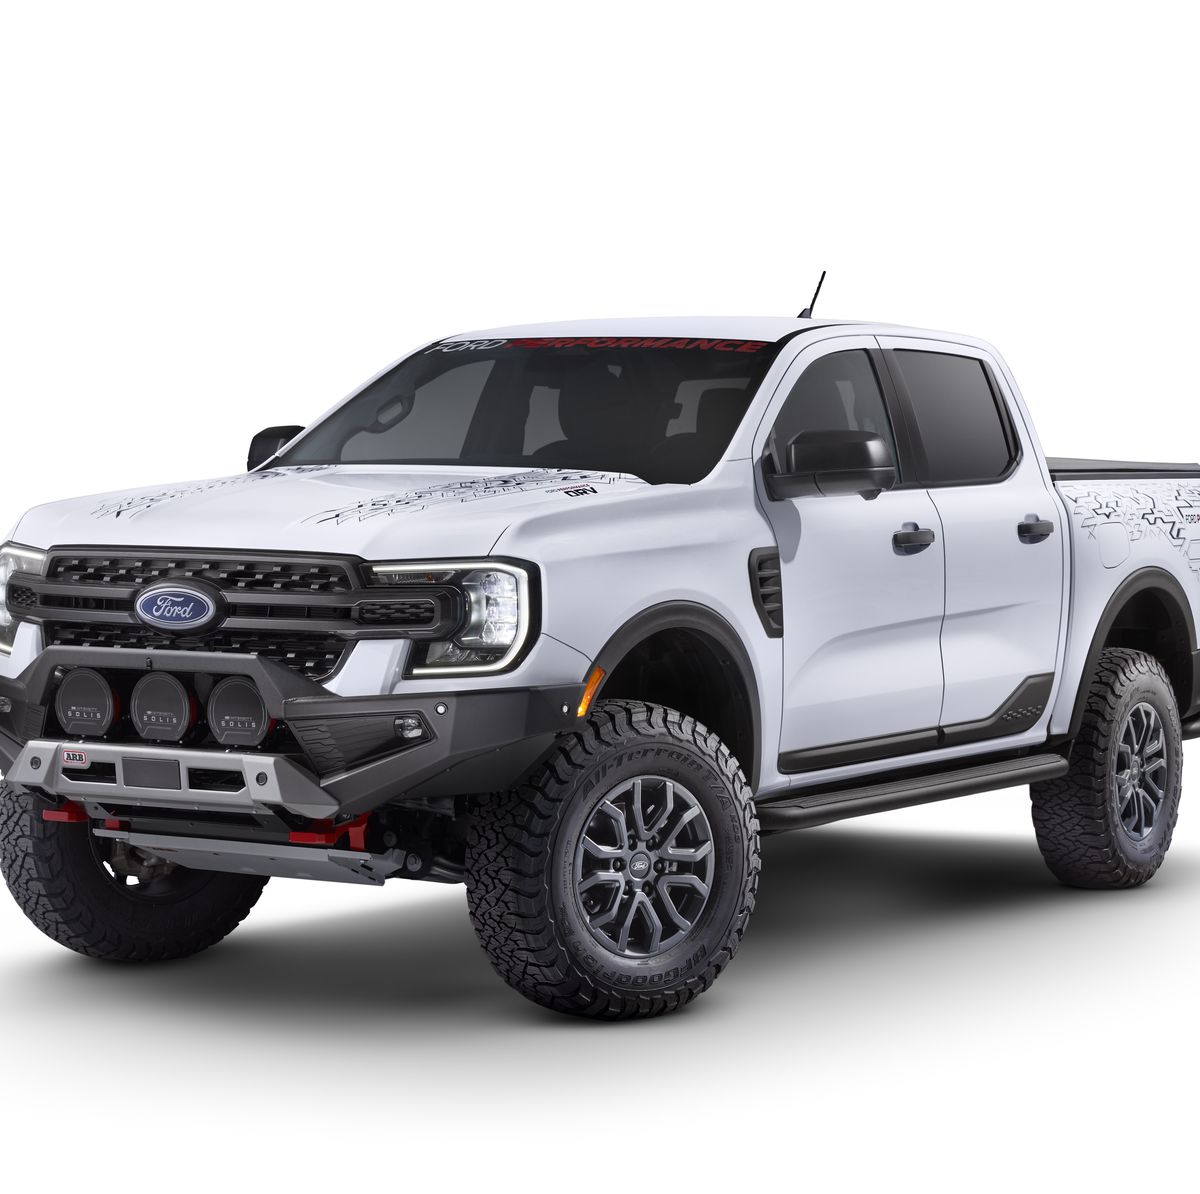 Ford Ranger Adds ARB Off-Road Hardware for Overlanding SEMA Concept